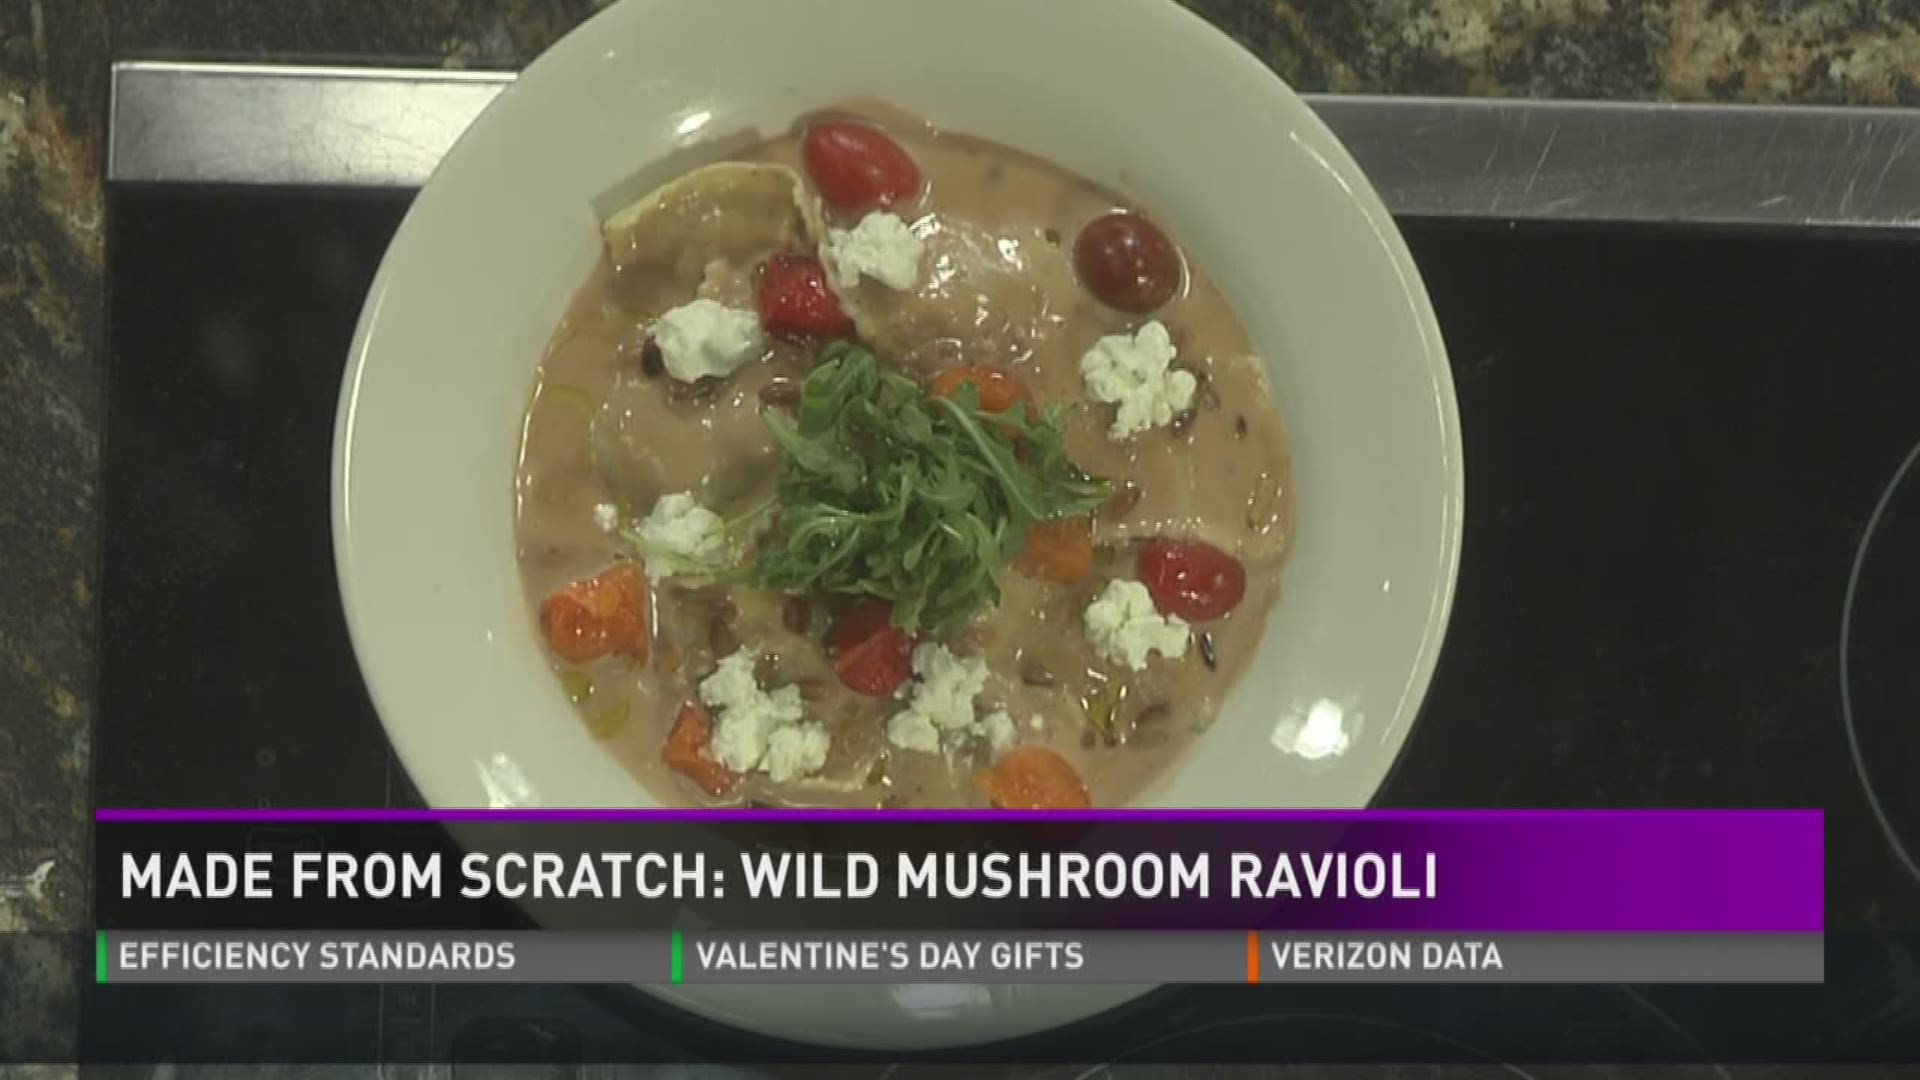 Frank Aloise from Cappucinno's came on 10News at Noon to discuss how to make wild mushroom ravioli.